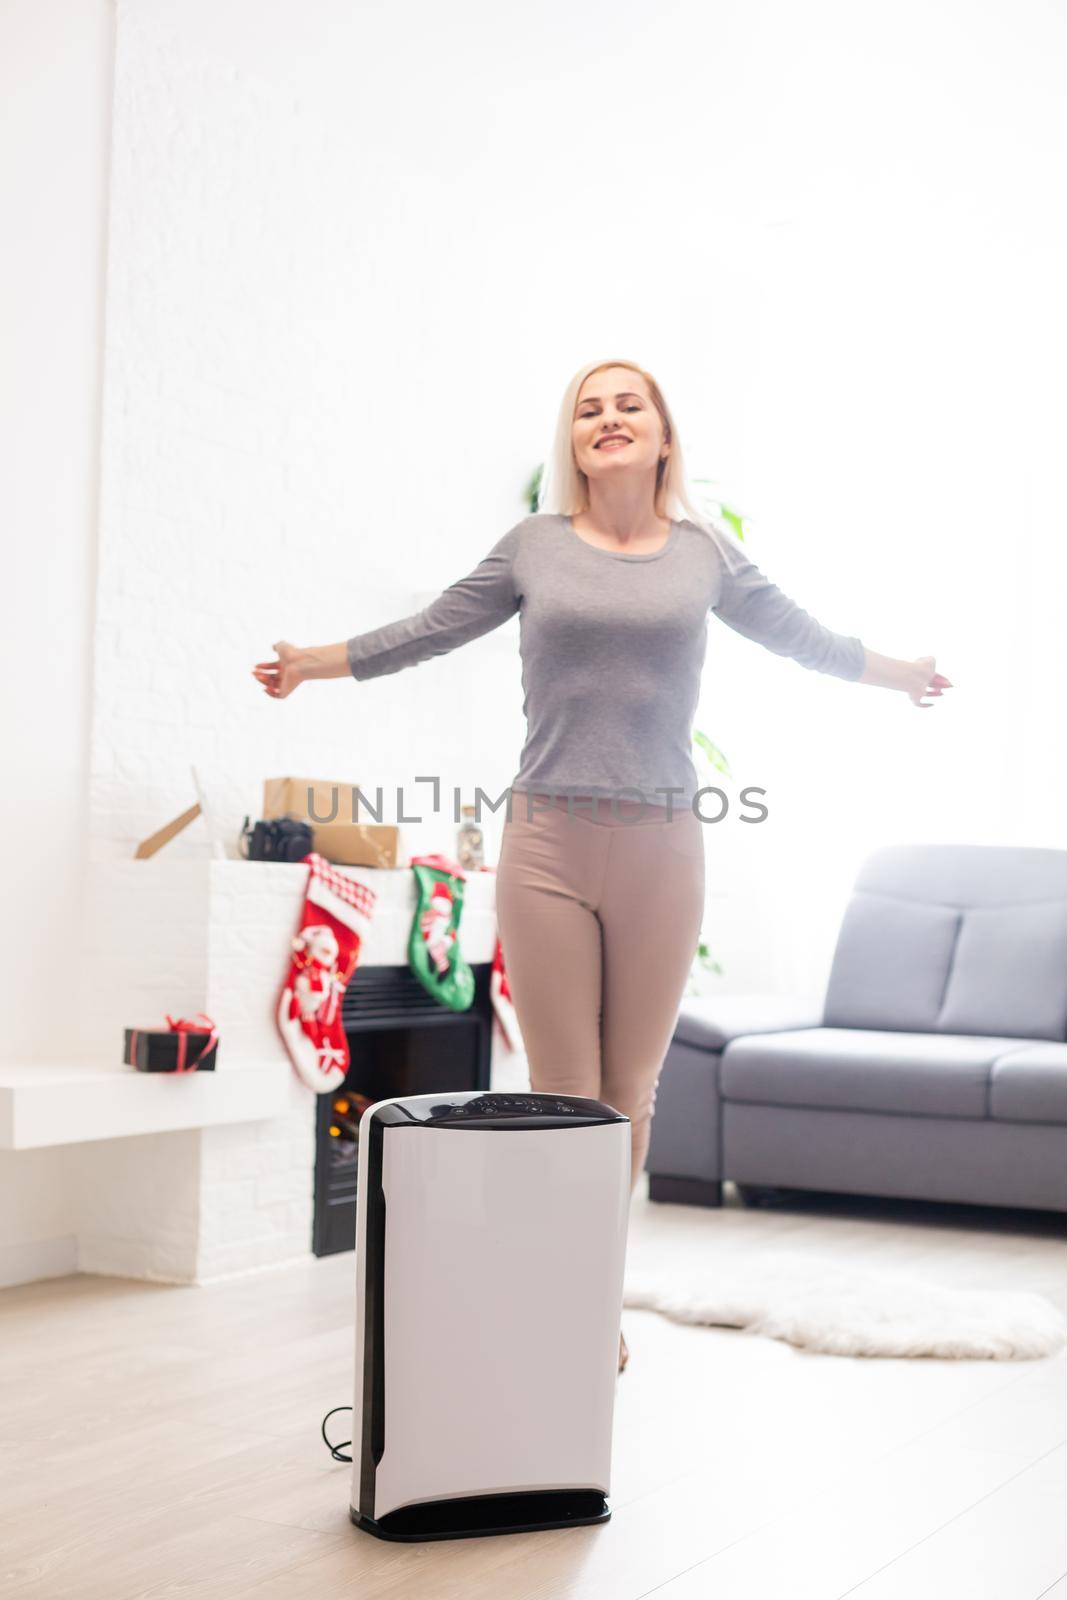 Air purifier in a living room, woman working with laptop with filter for clean room by Andelov13